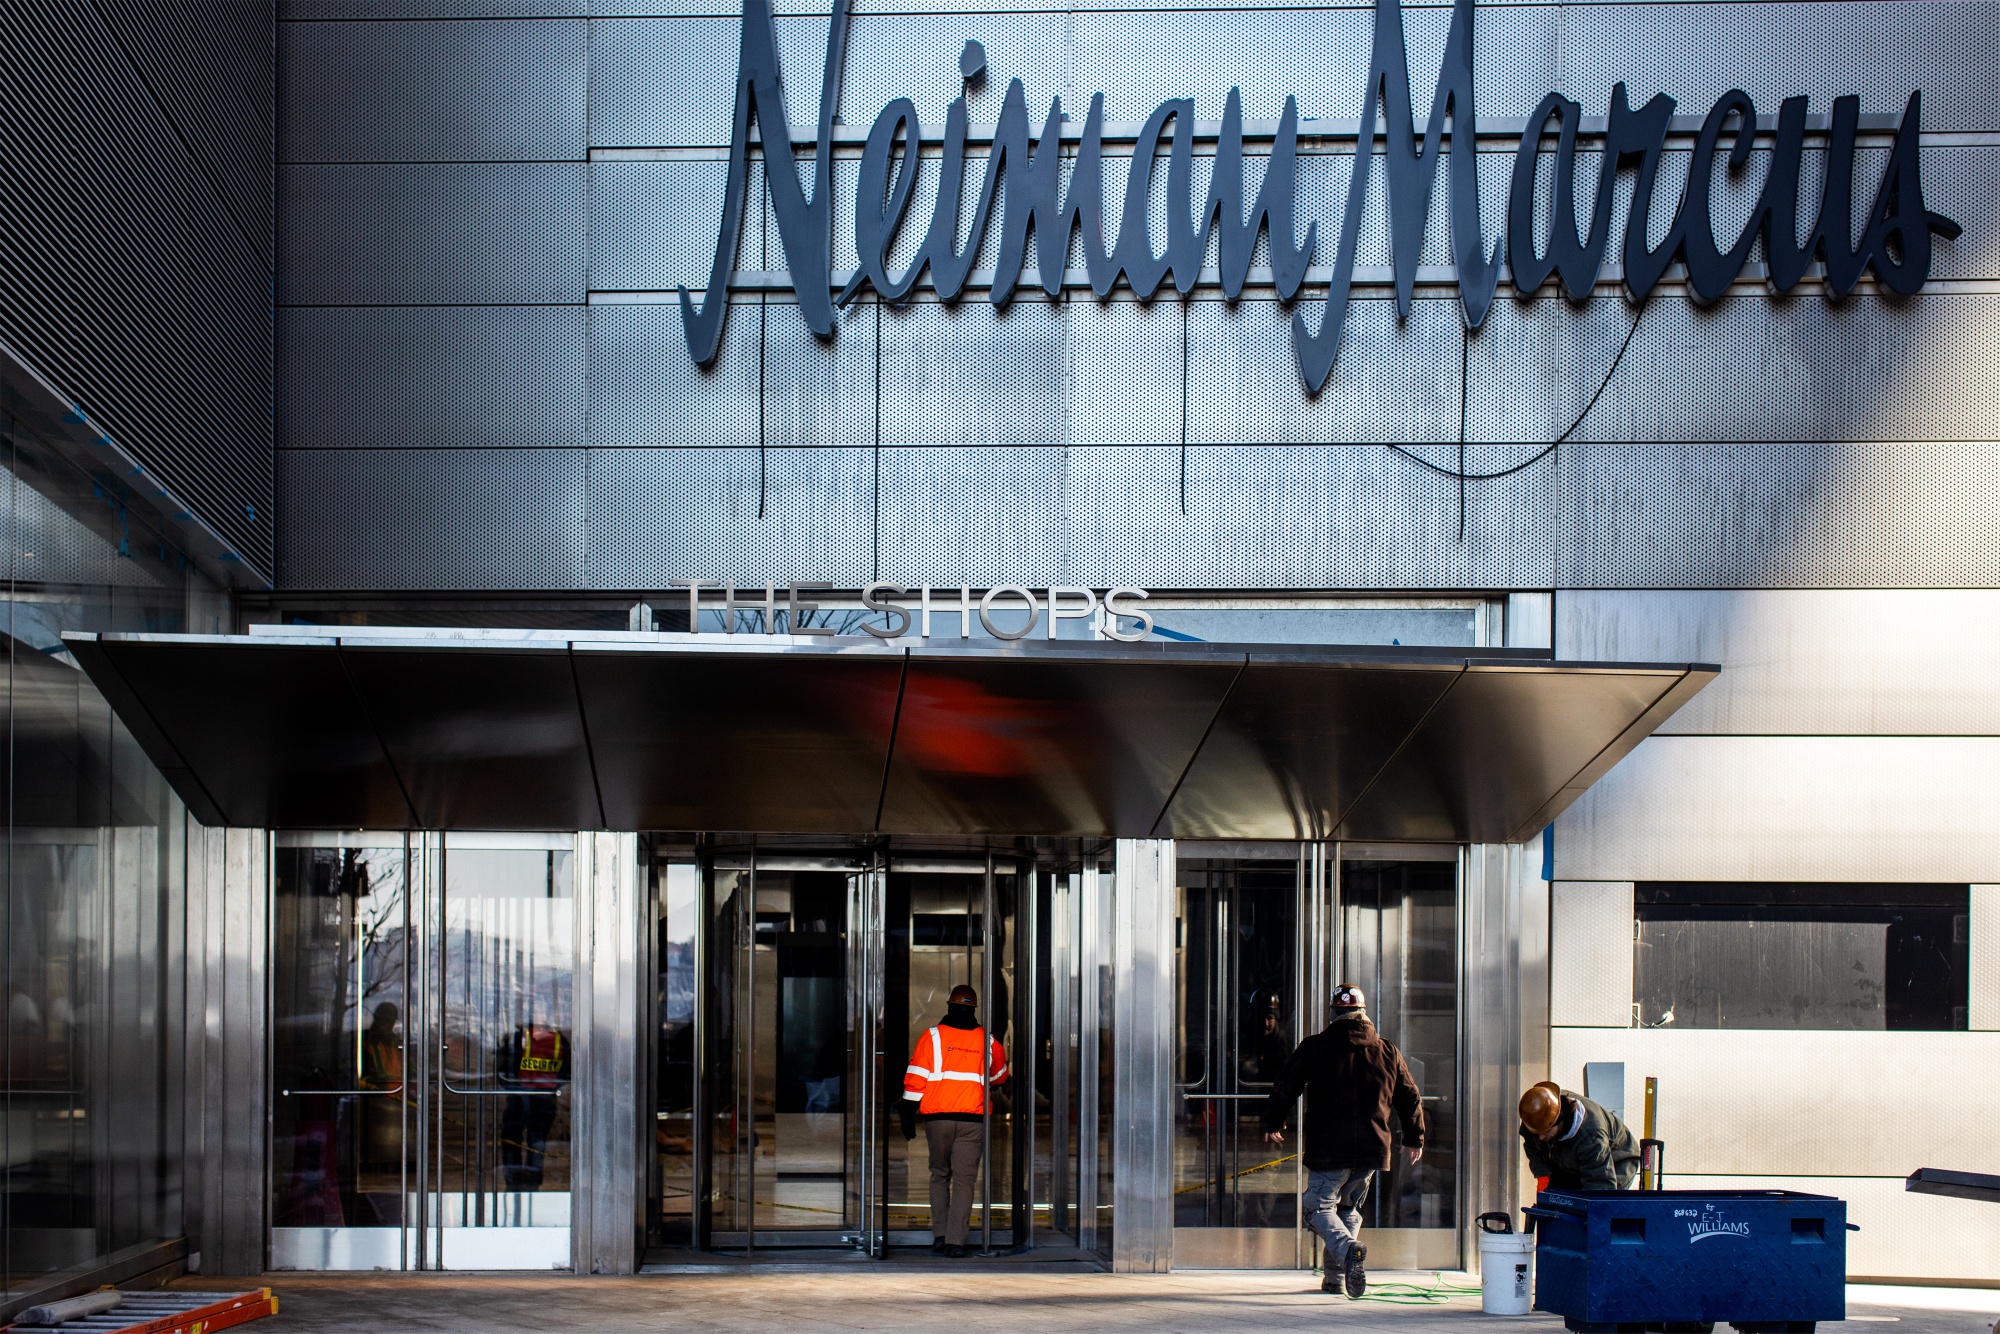 Is Neiman Marcus right to focus on the top two percent of its